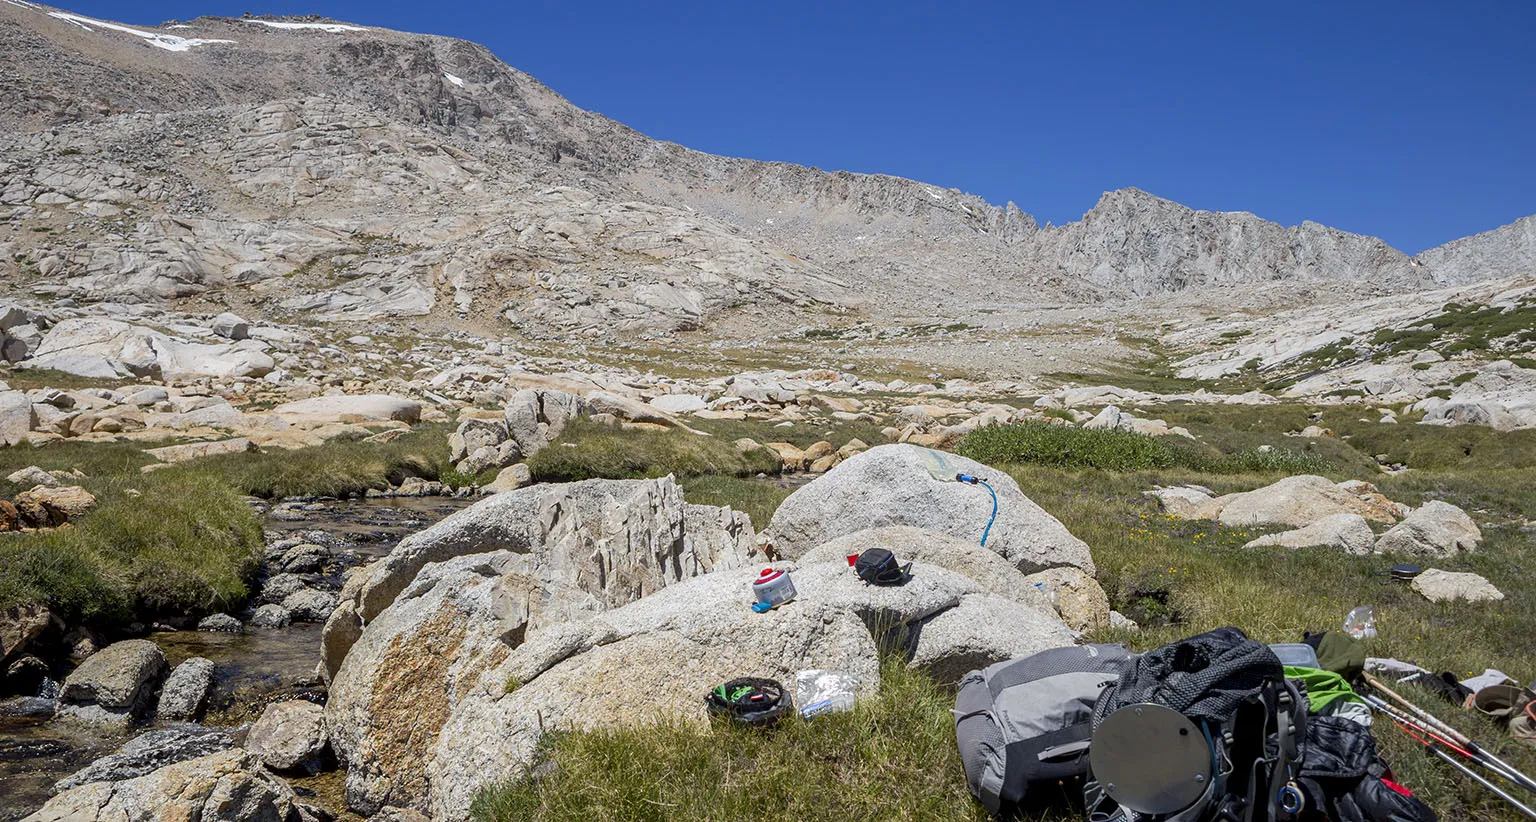 Lunch spot and our messy gear. Forester Pass is the tiny snow spot on the far right in the back